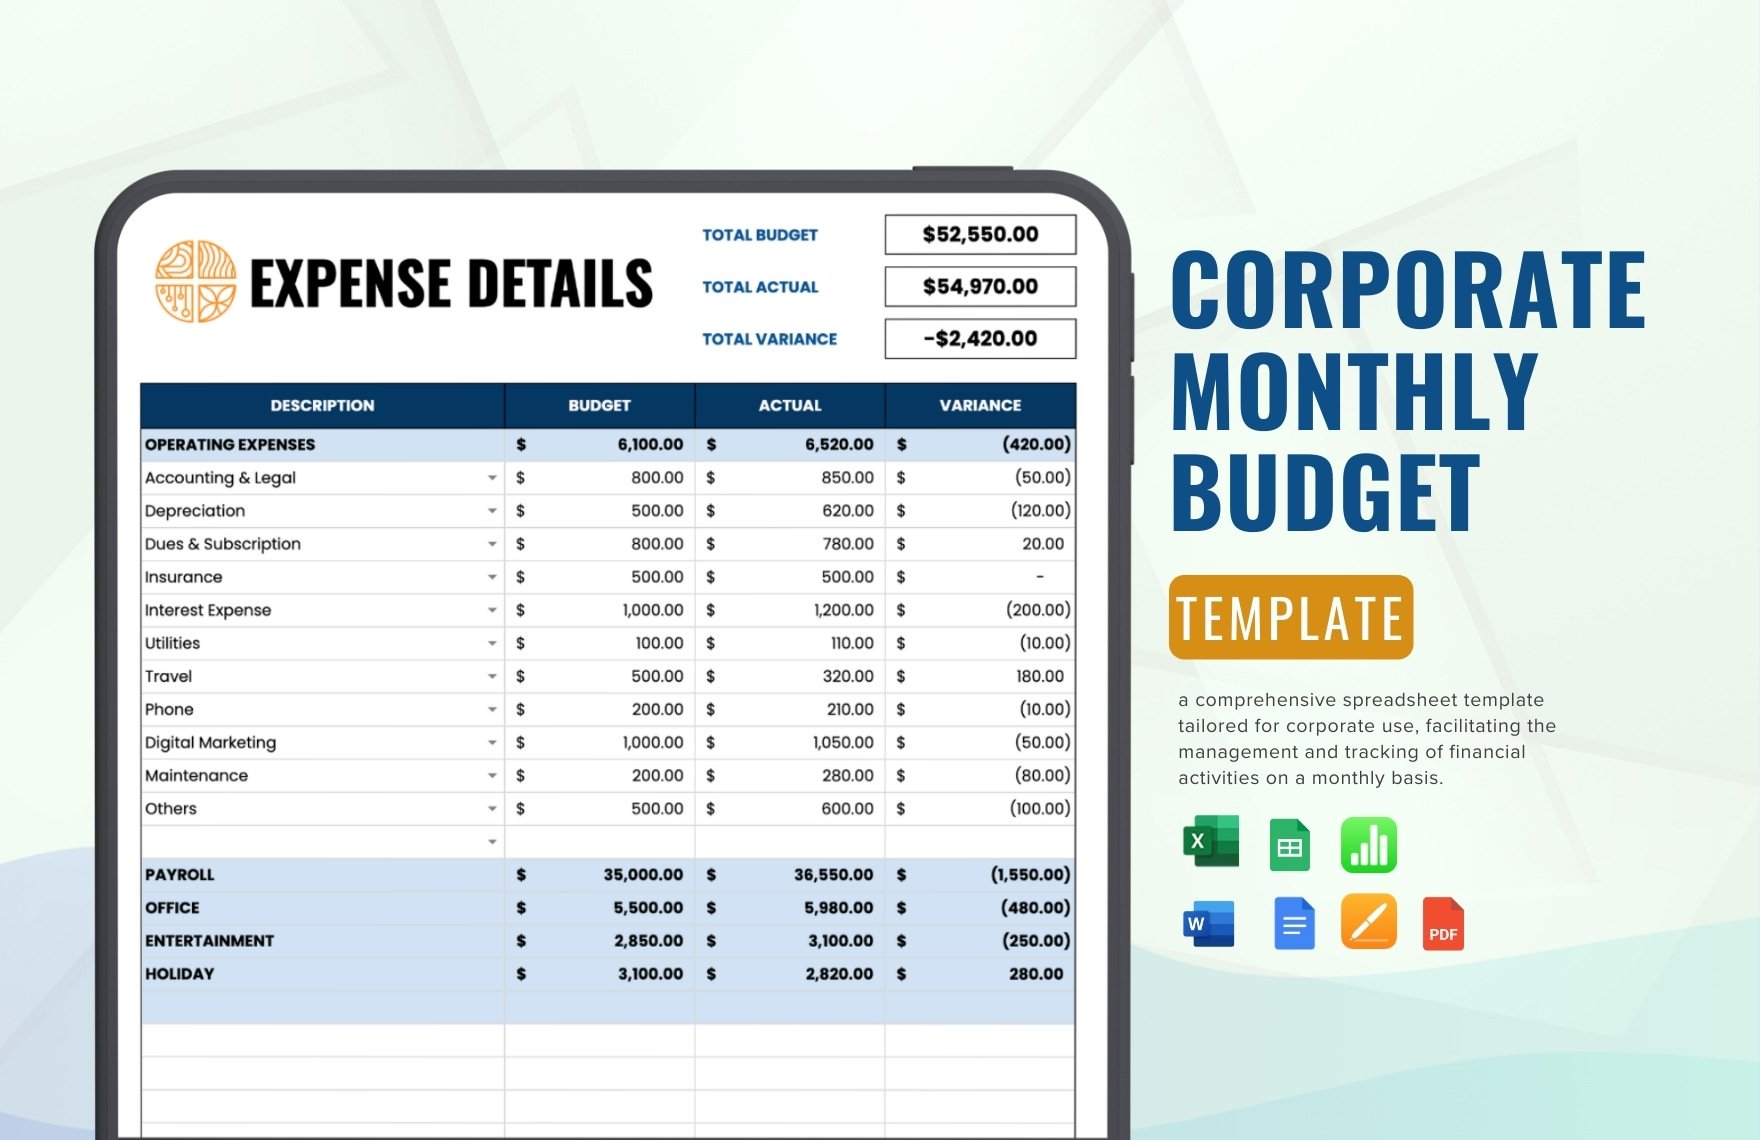 Corporate Monthly Budget Template in Word, Google Docs, Excel, PDF, Google Sheets, Apple Pages, Apple Numbers